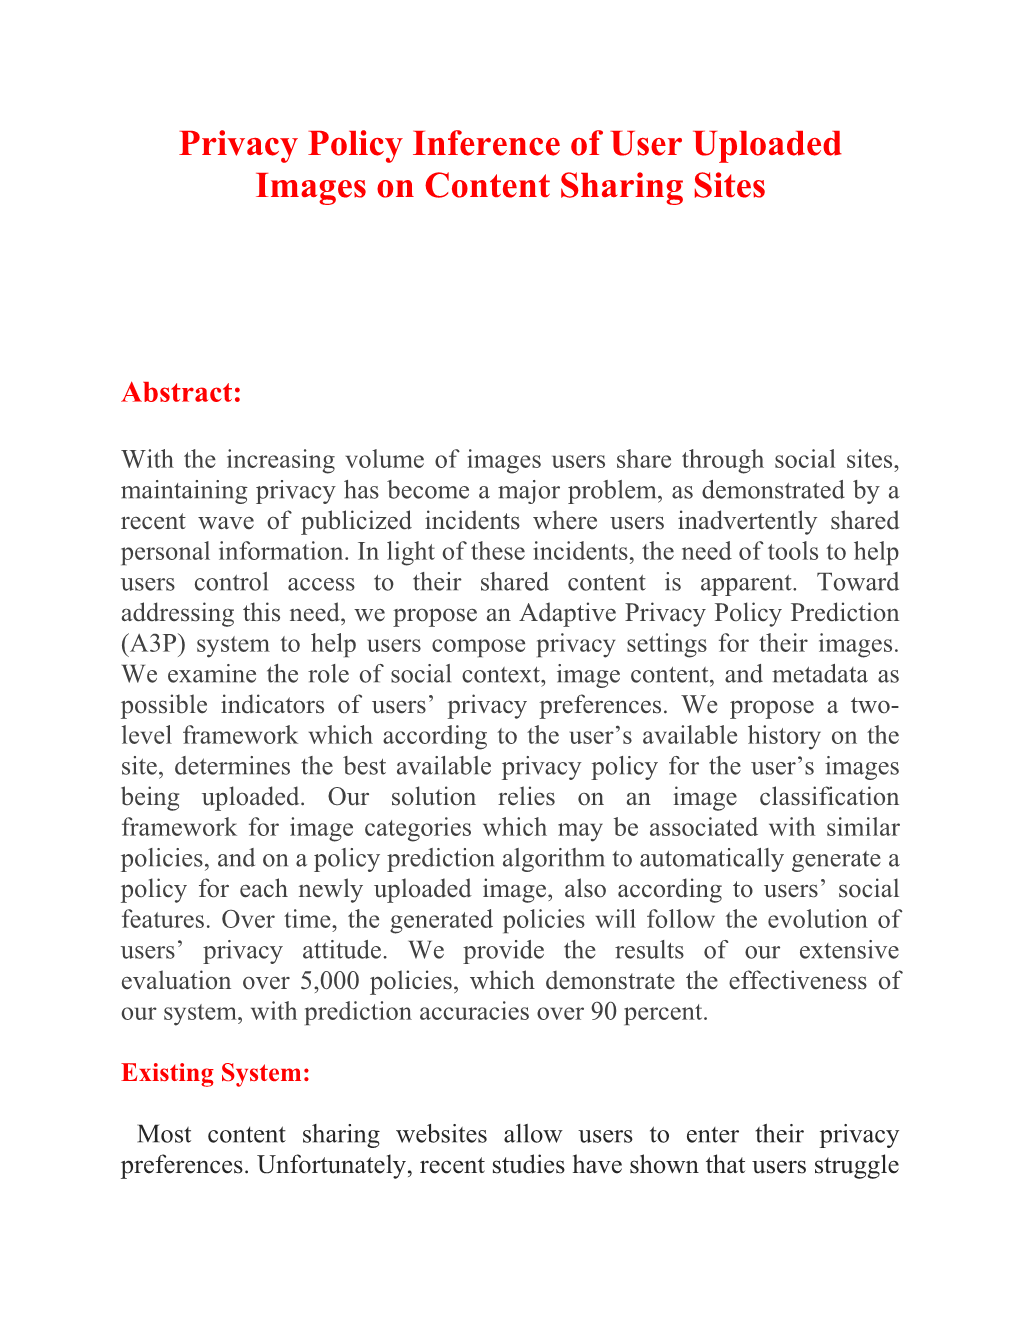 Privacy Policy Inference of User Uploaded Images on Content Sharing Sites